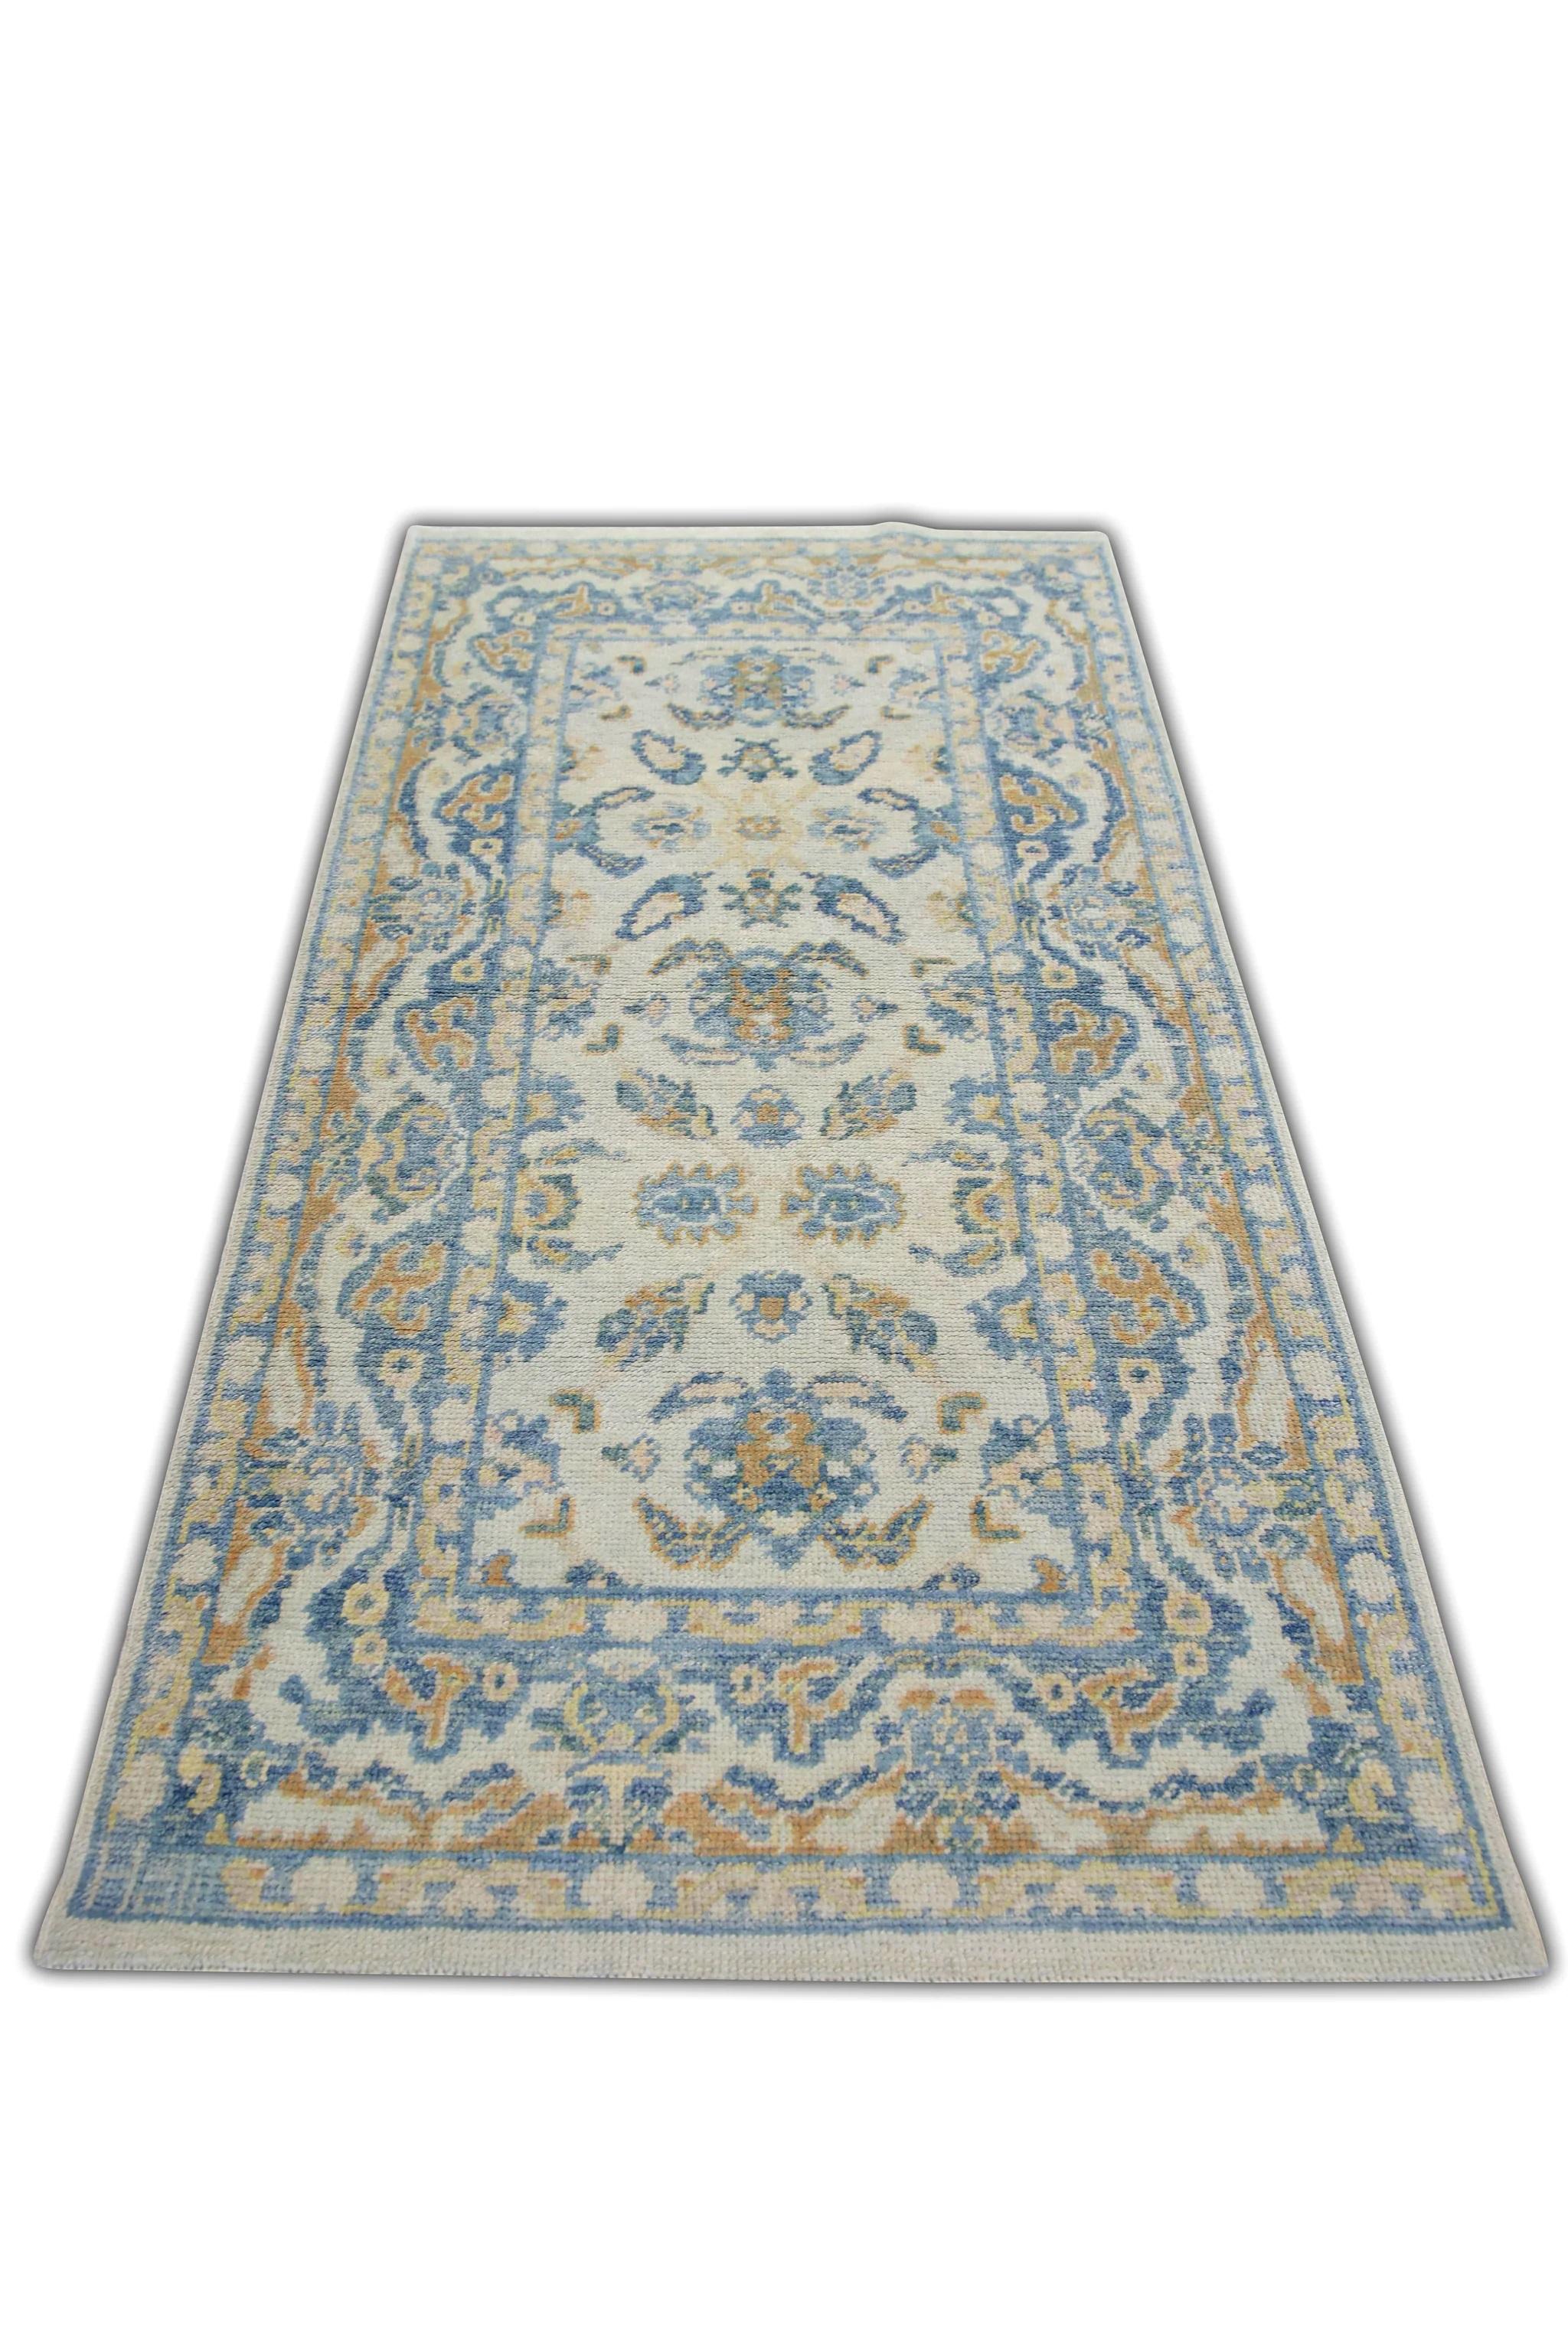 Blue and Yellow Floral Handwoven Wool Turkish Oushak Rug 3'2